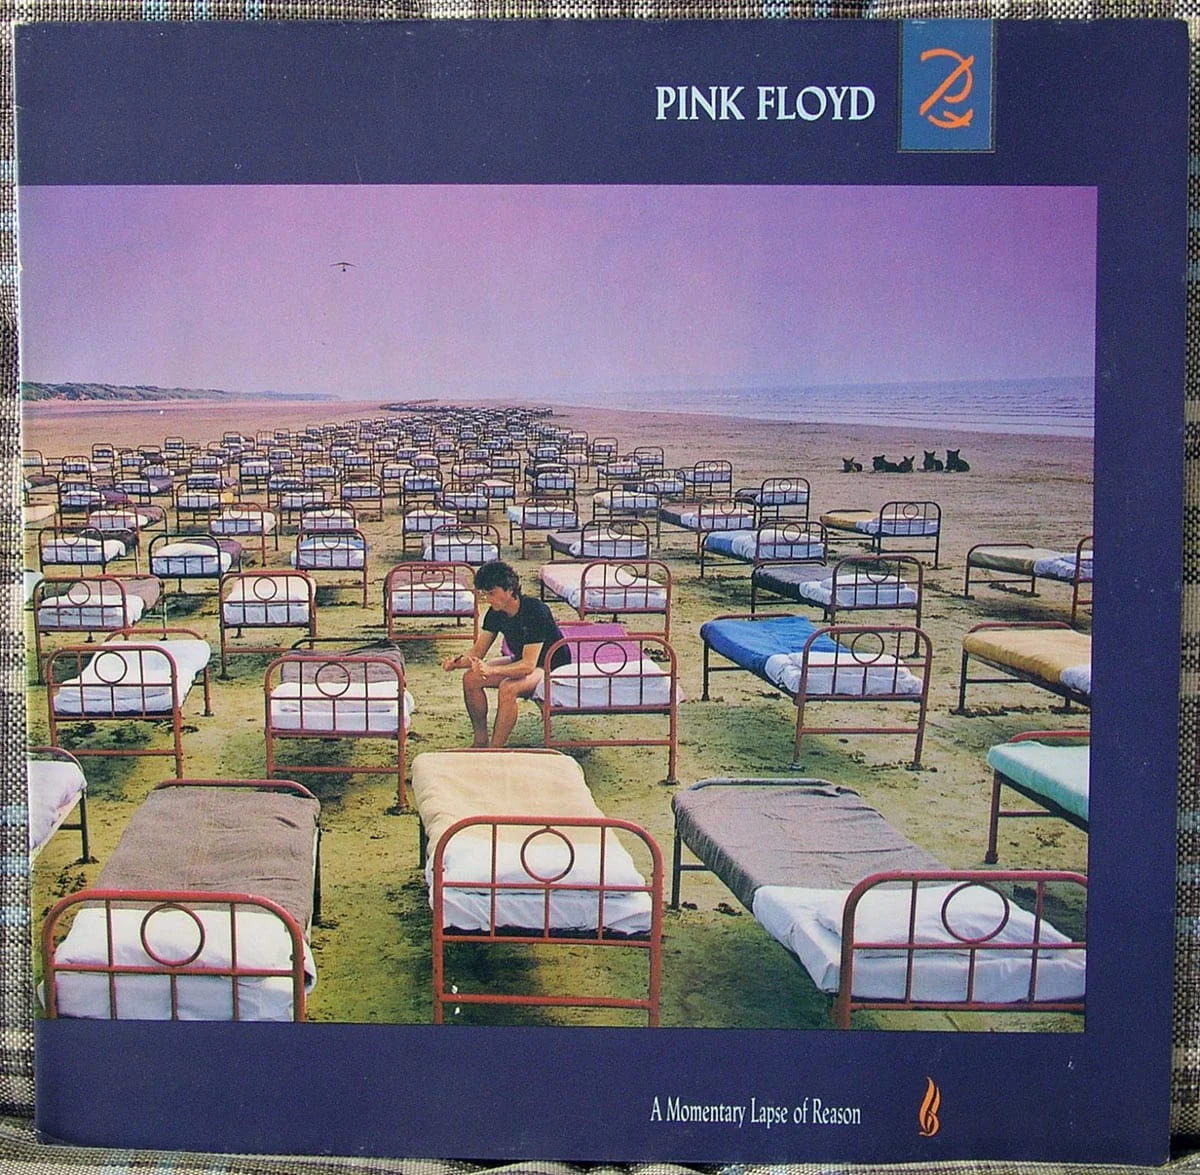 A Momentary Lapse Of The Reason cover